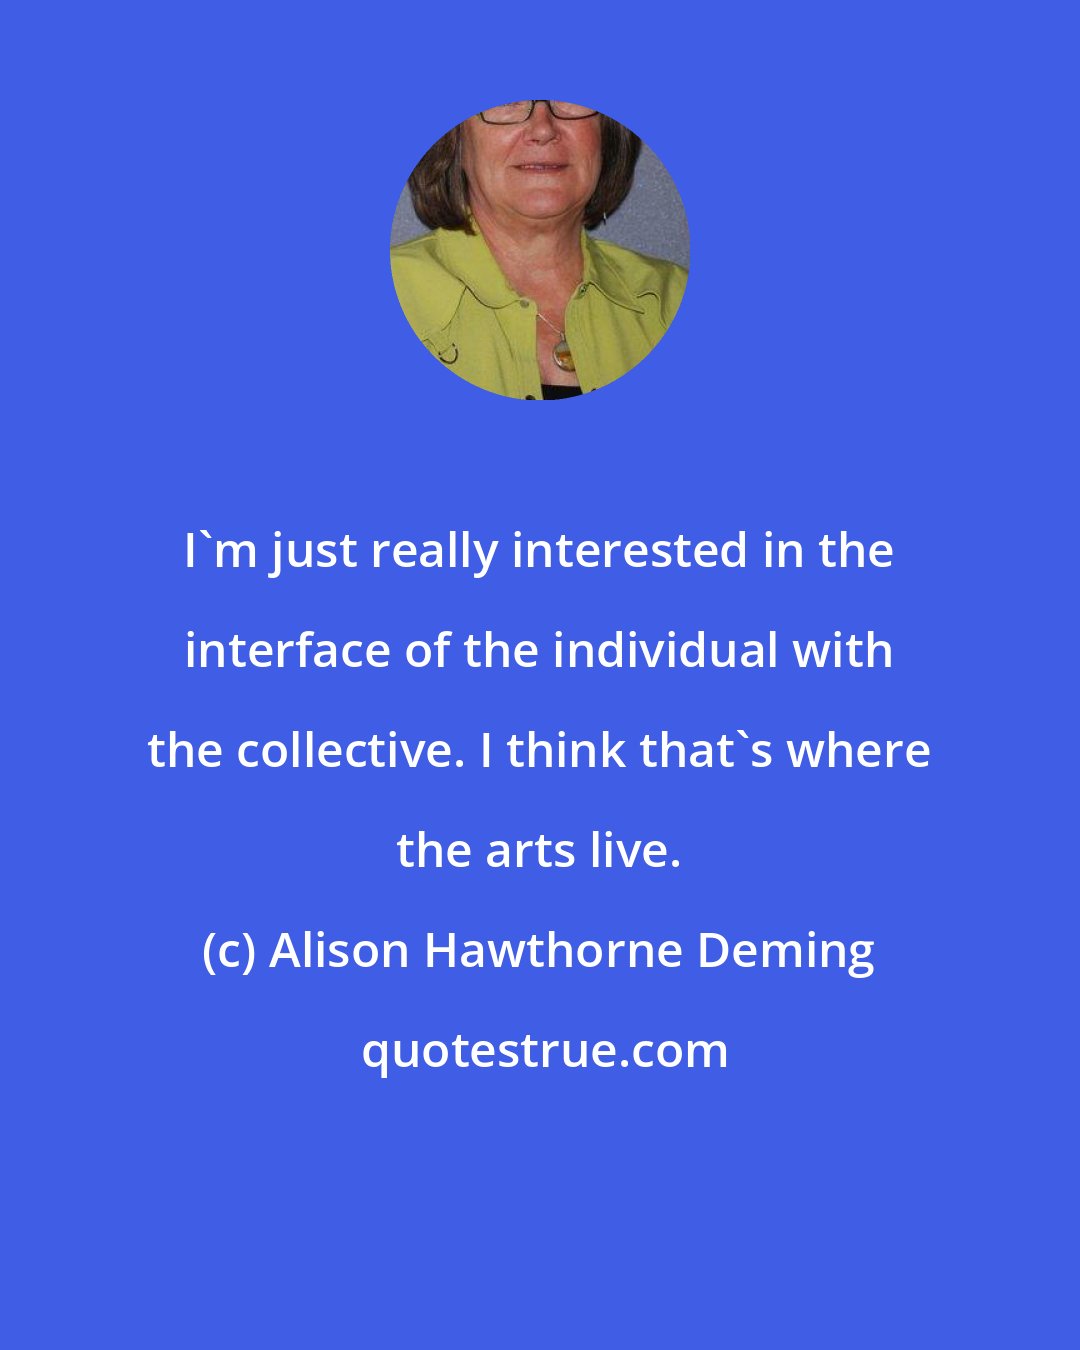 Alison Hawthorne Deming: I'm just really interested in the interface of the individual with the collective. I think that's where the arts live.